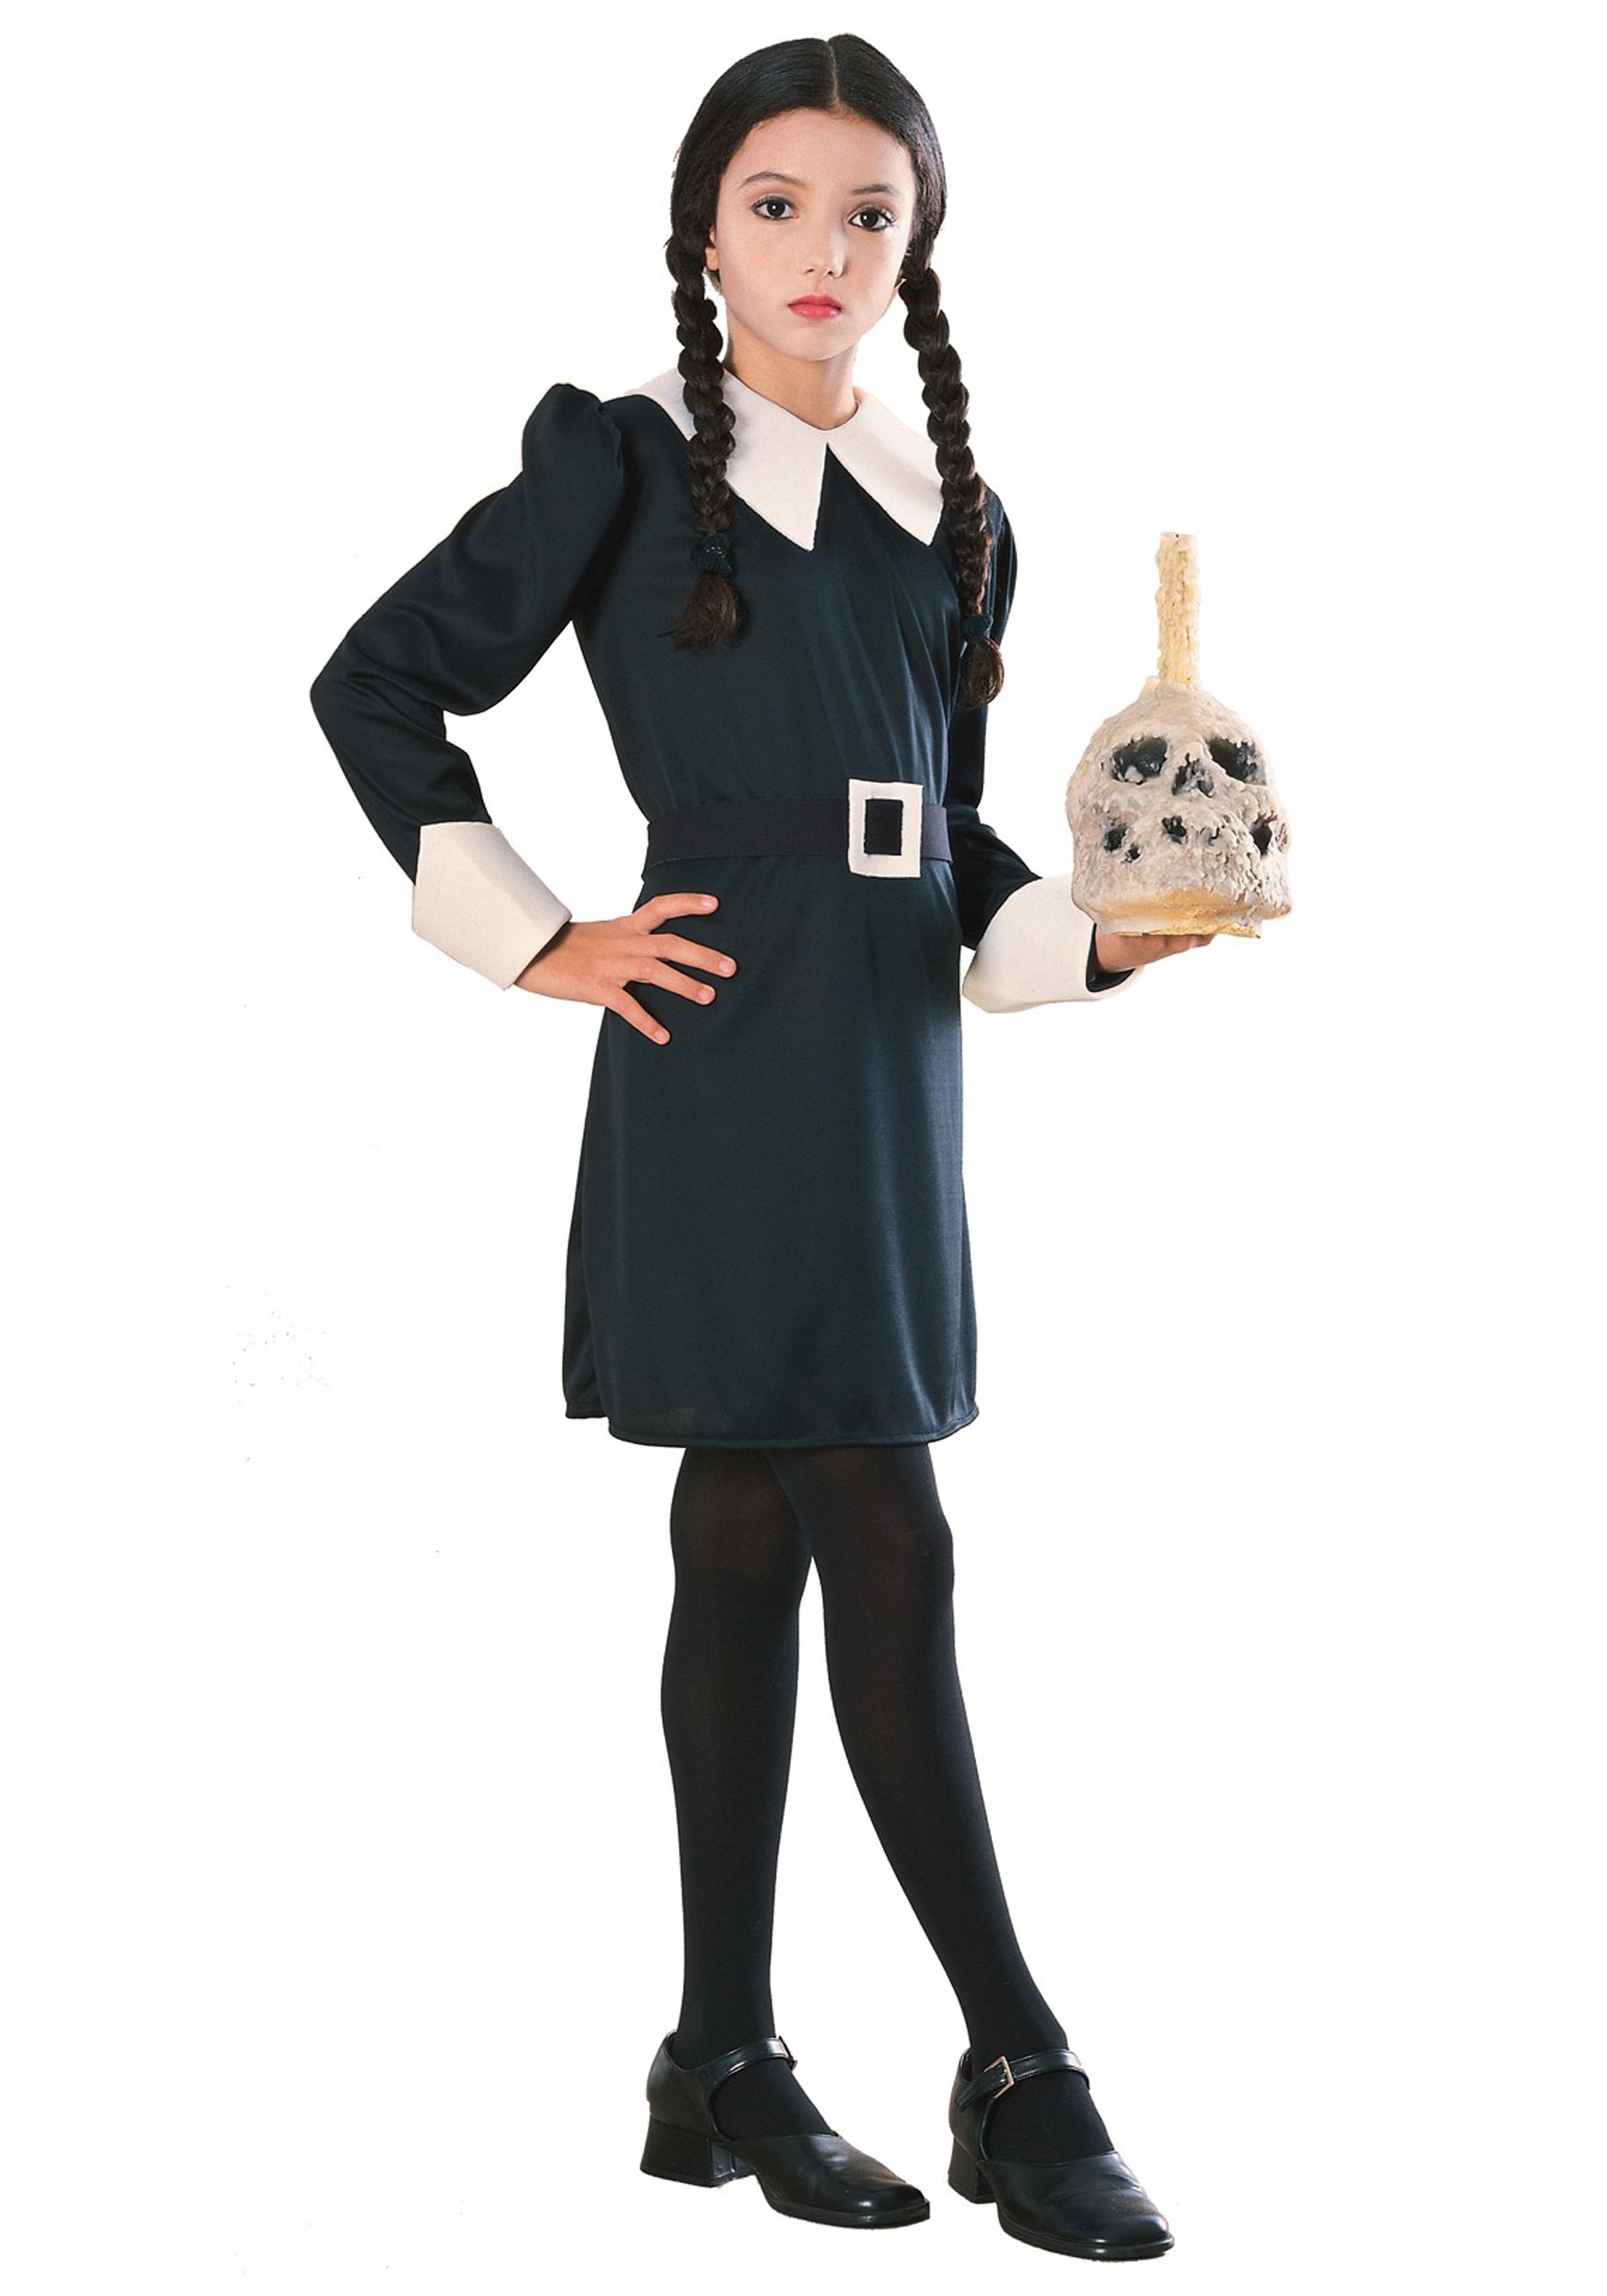 The Addams Family Wednesday Addams Gothic Cosplay Halloween Adult